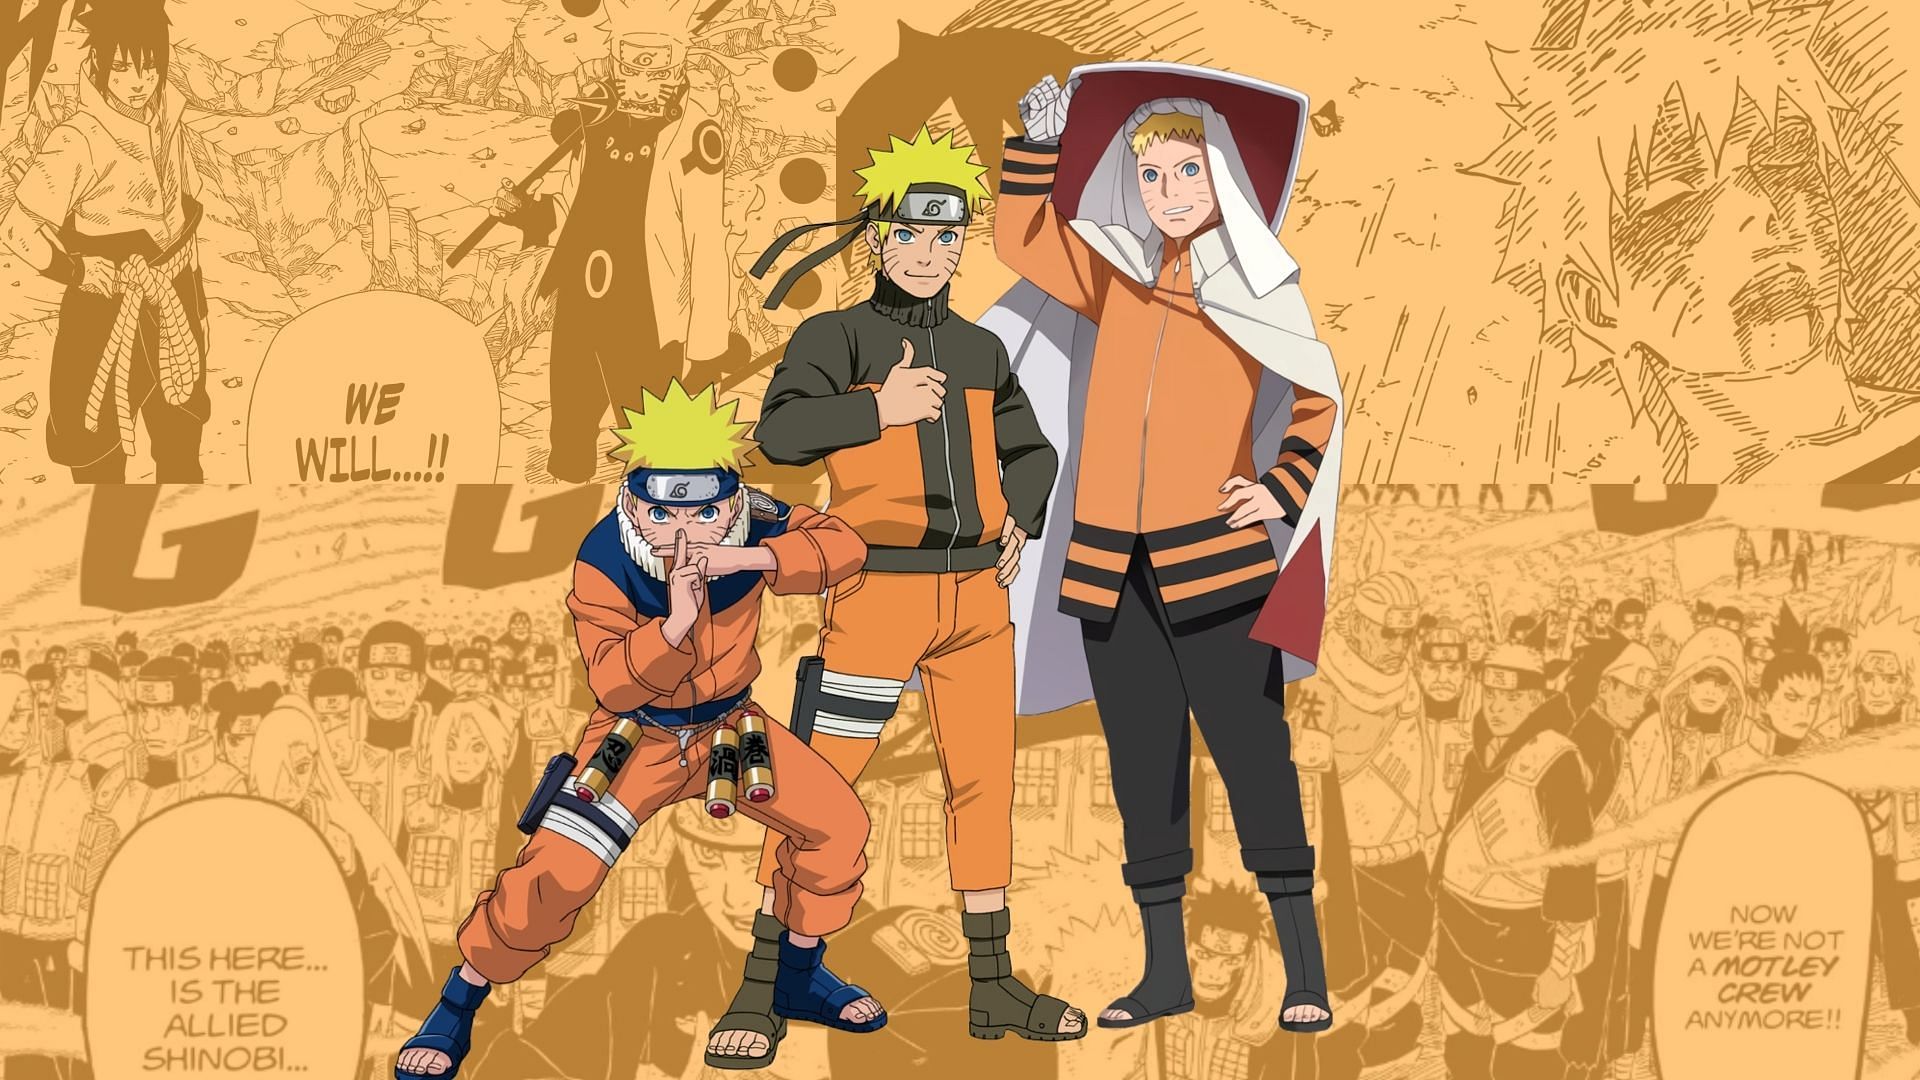 Naruto Iconic Anime Scenes ReAnimated For the 20th Anniversary